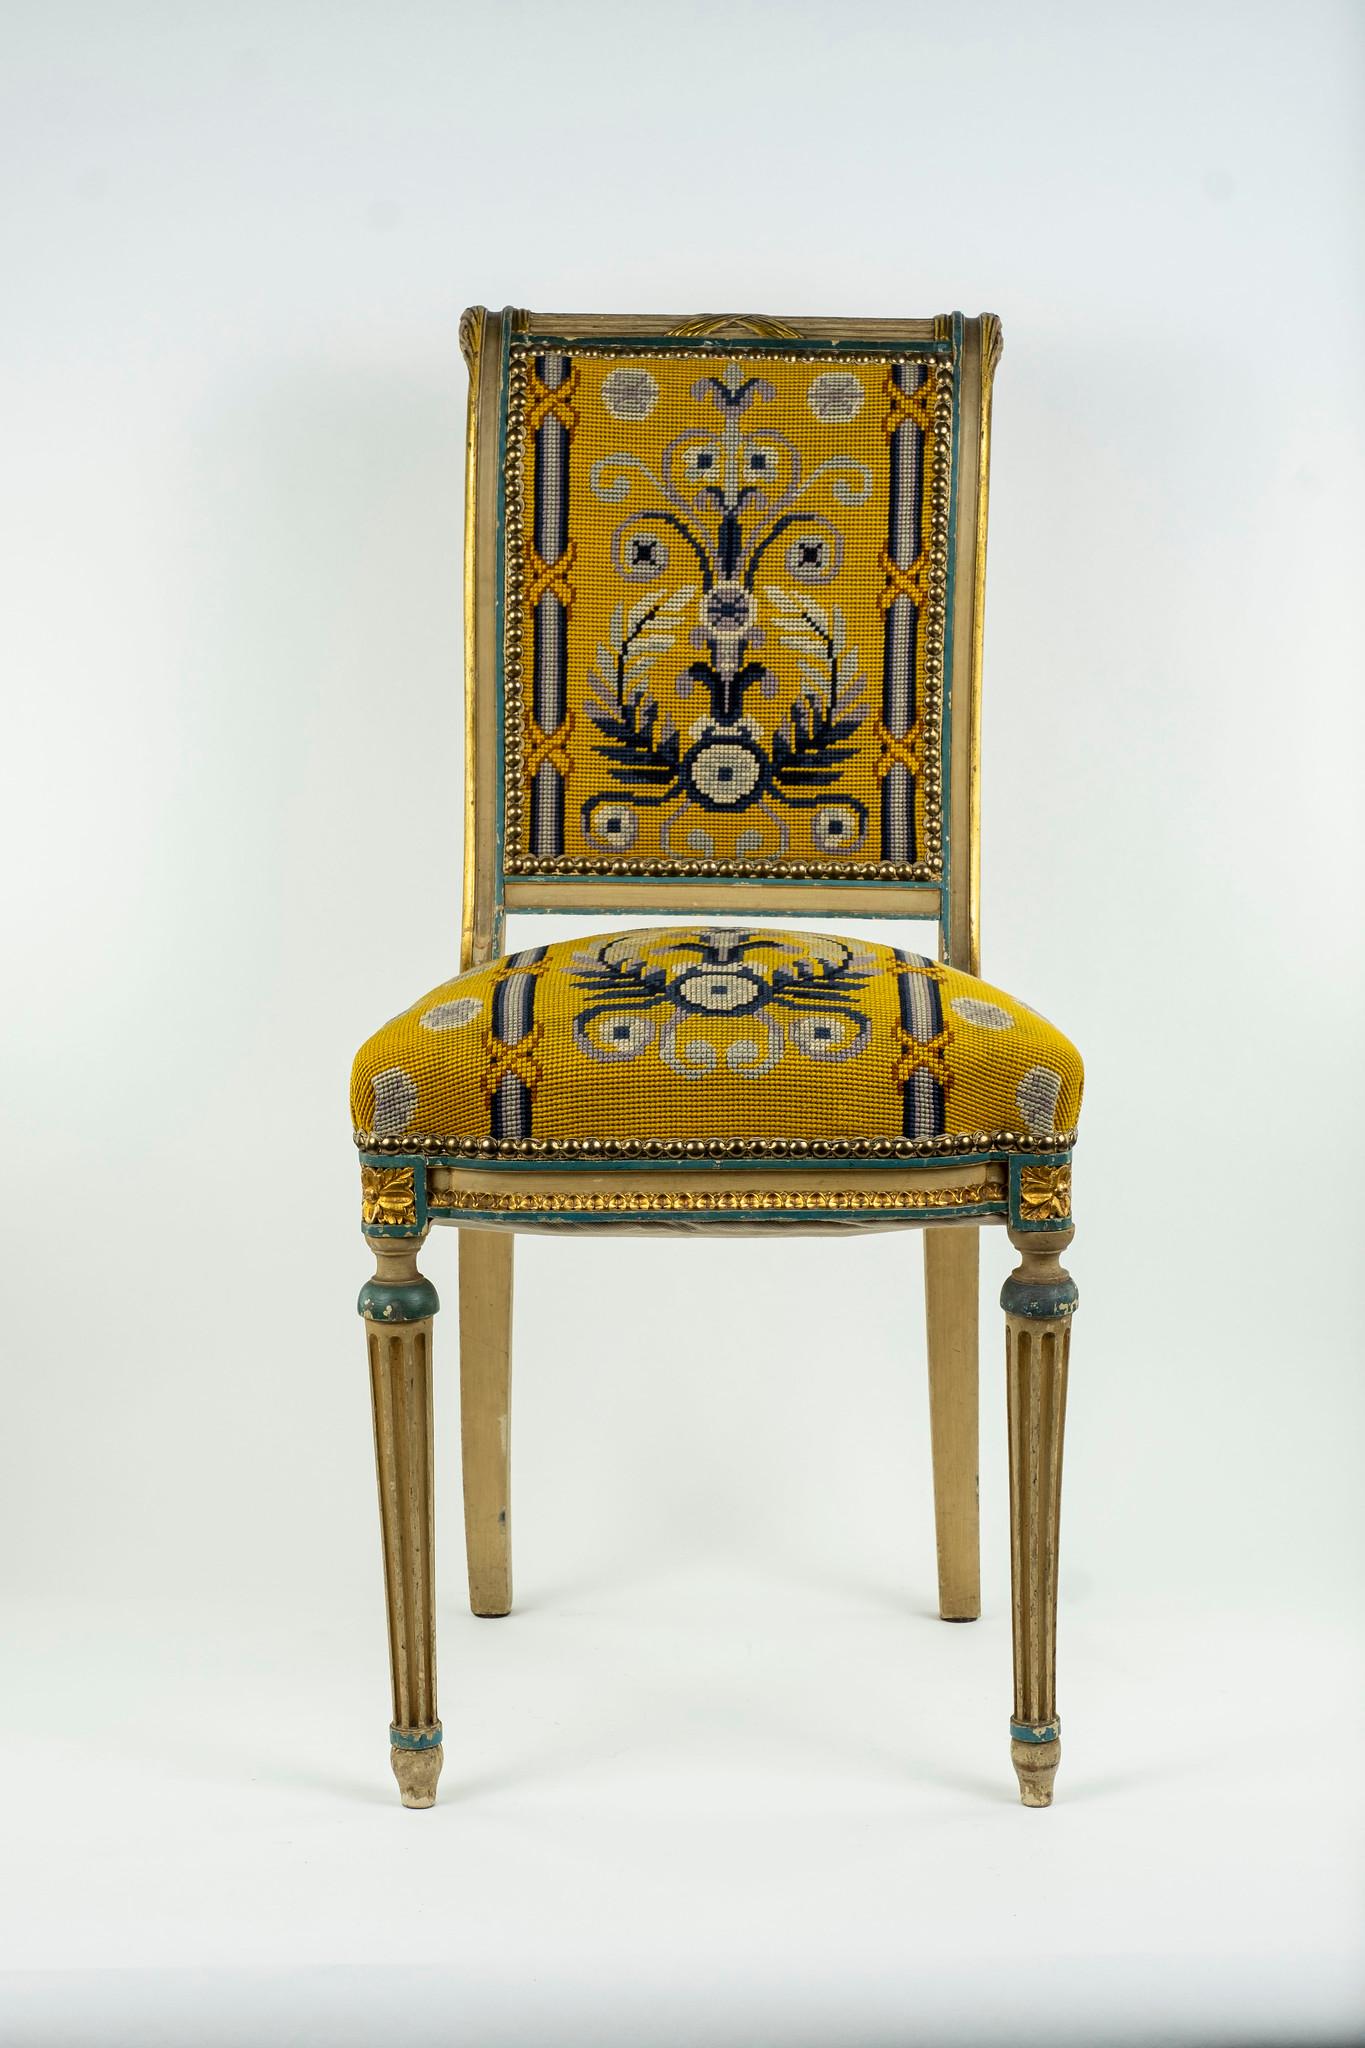 19th century French Louis XVI style chair. Hardwood painted frame with gilded accents upholstered in a classical needlepoint with nailhead detail. Two chairs available, sold by the each.